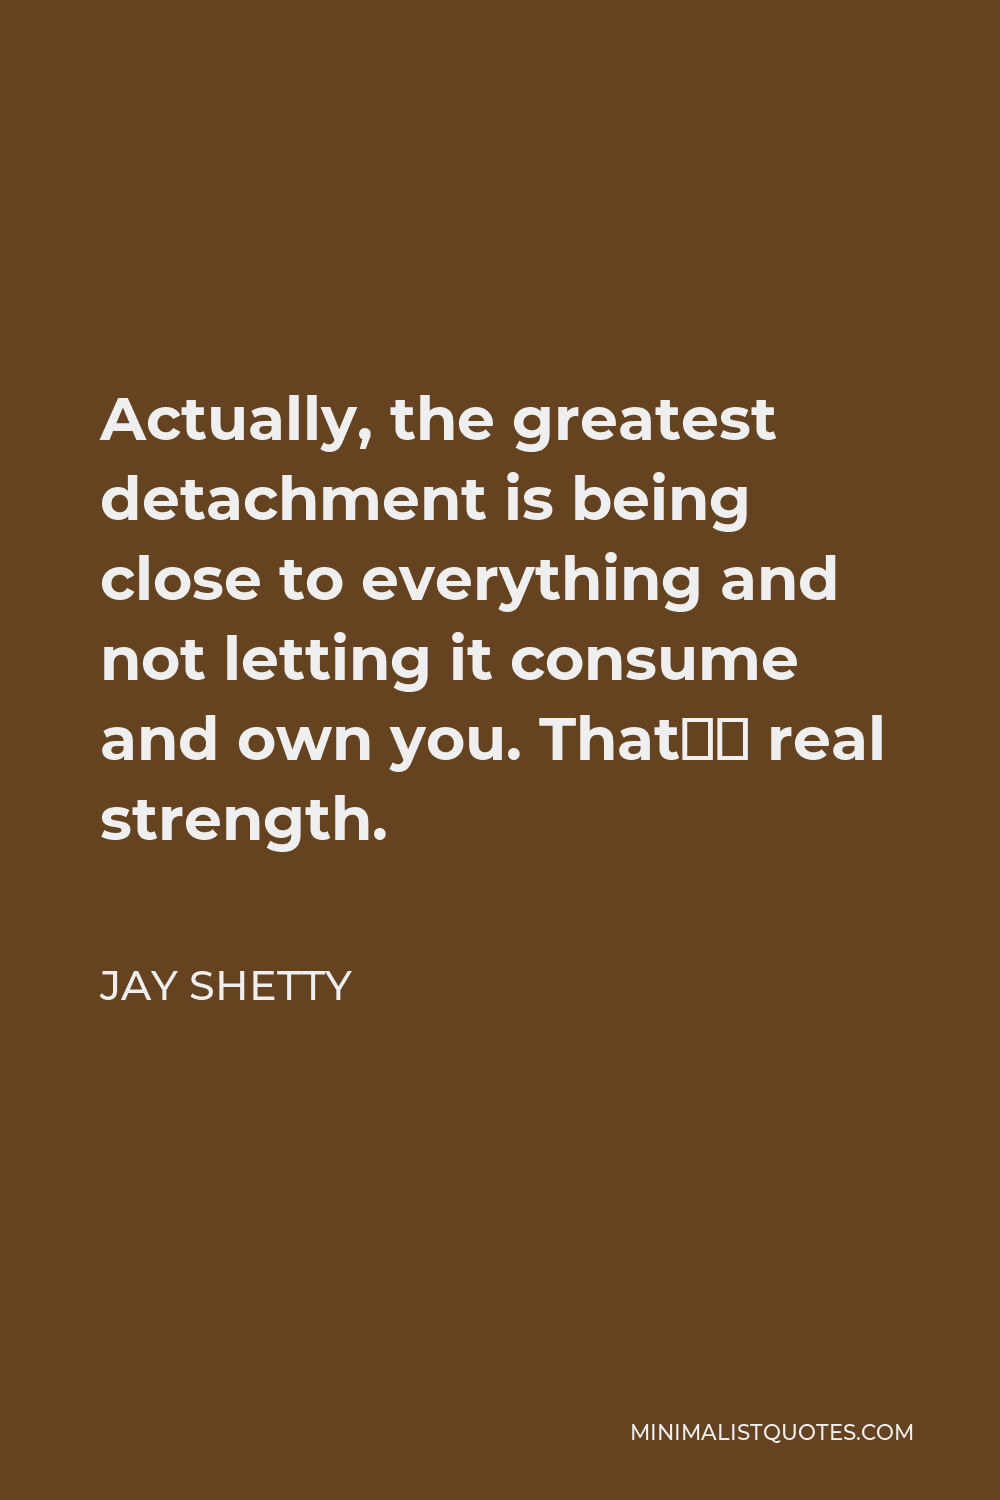 Jay Shetty Quote - Actually, the greatest detachment is being close to everything and not letting it consume and own you. That’s real strength.